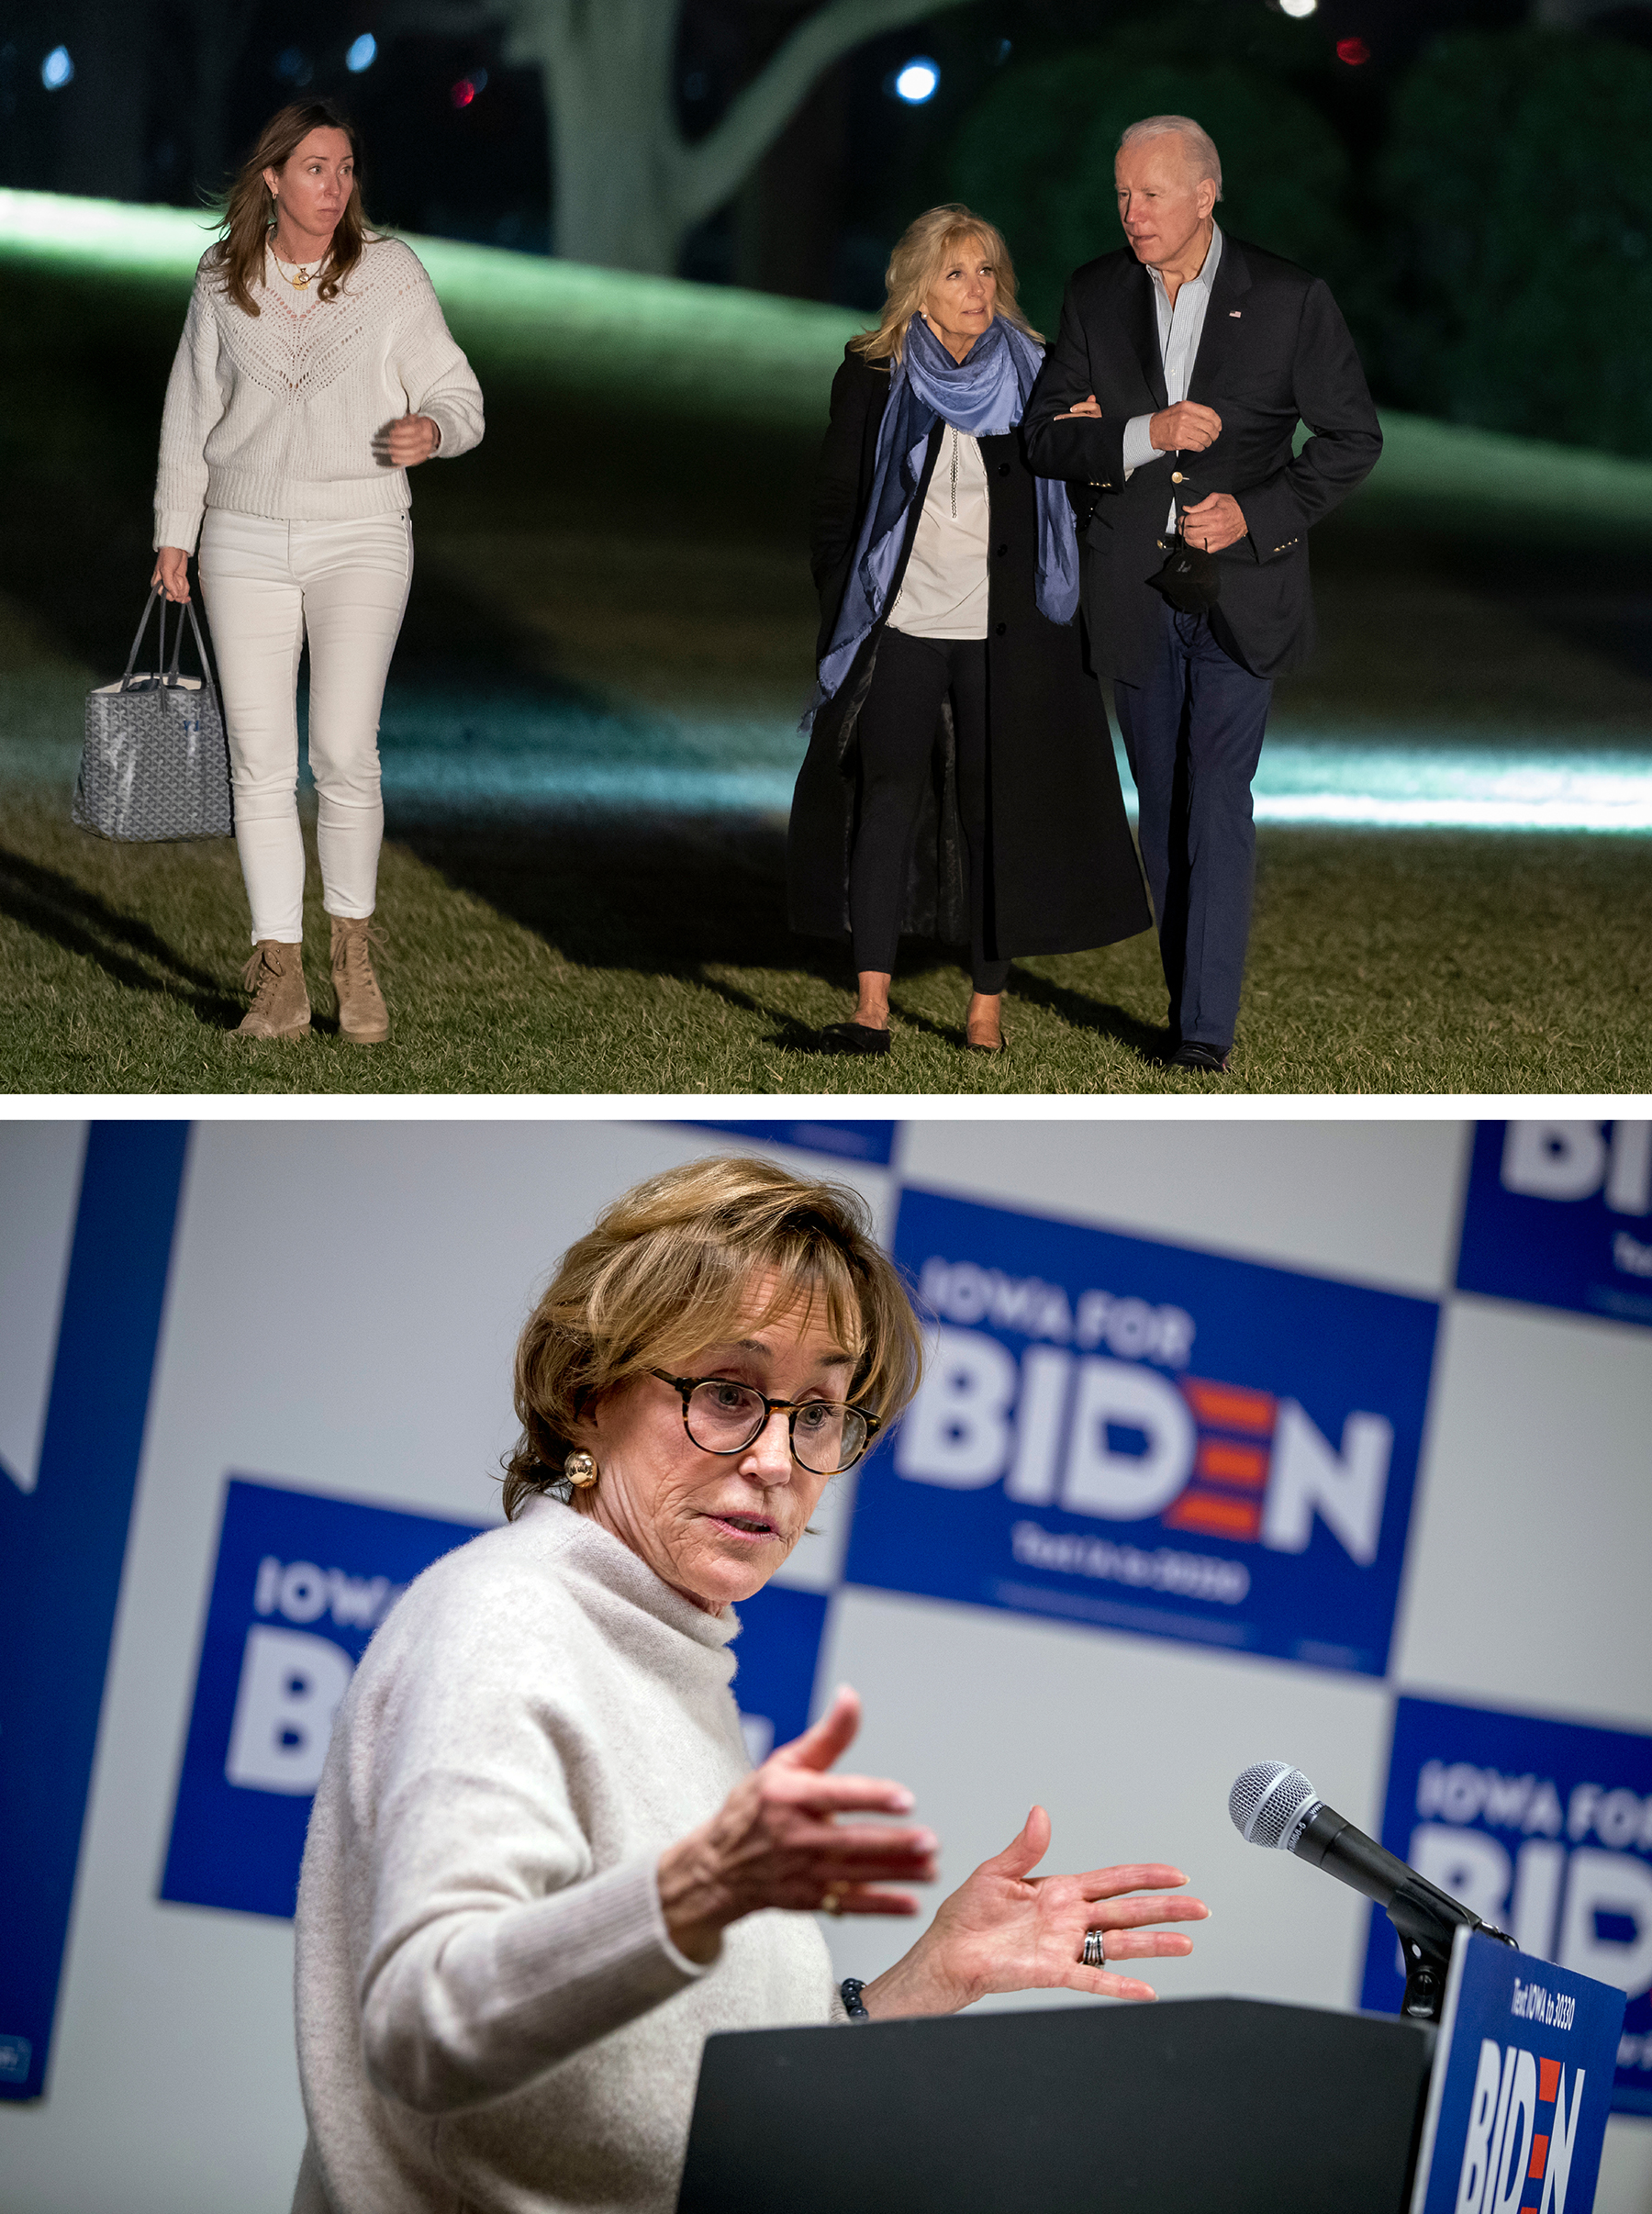 Top: President Joe Biden, first lady Jill Biden and Missy Owens walk along the South Lawn of the White House. Bottom: Valerie Biden Owens speaks at a campaign stop in Des Moines, Iowa. 